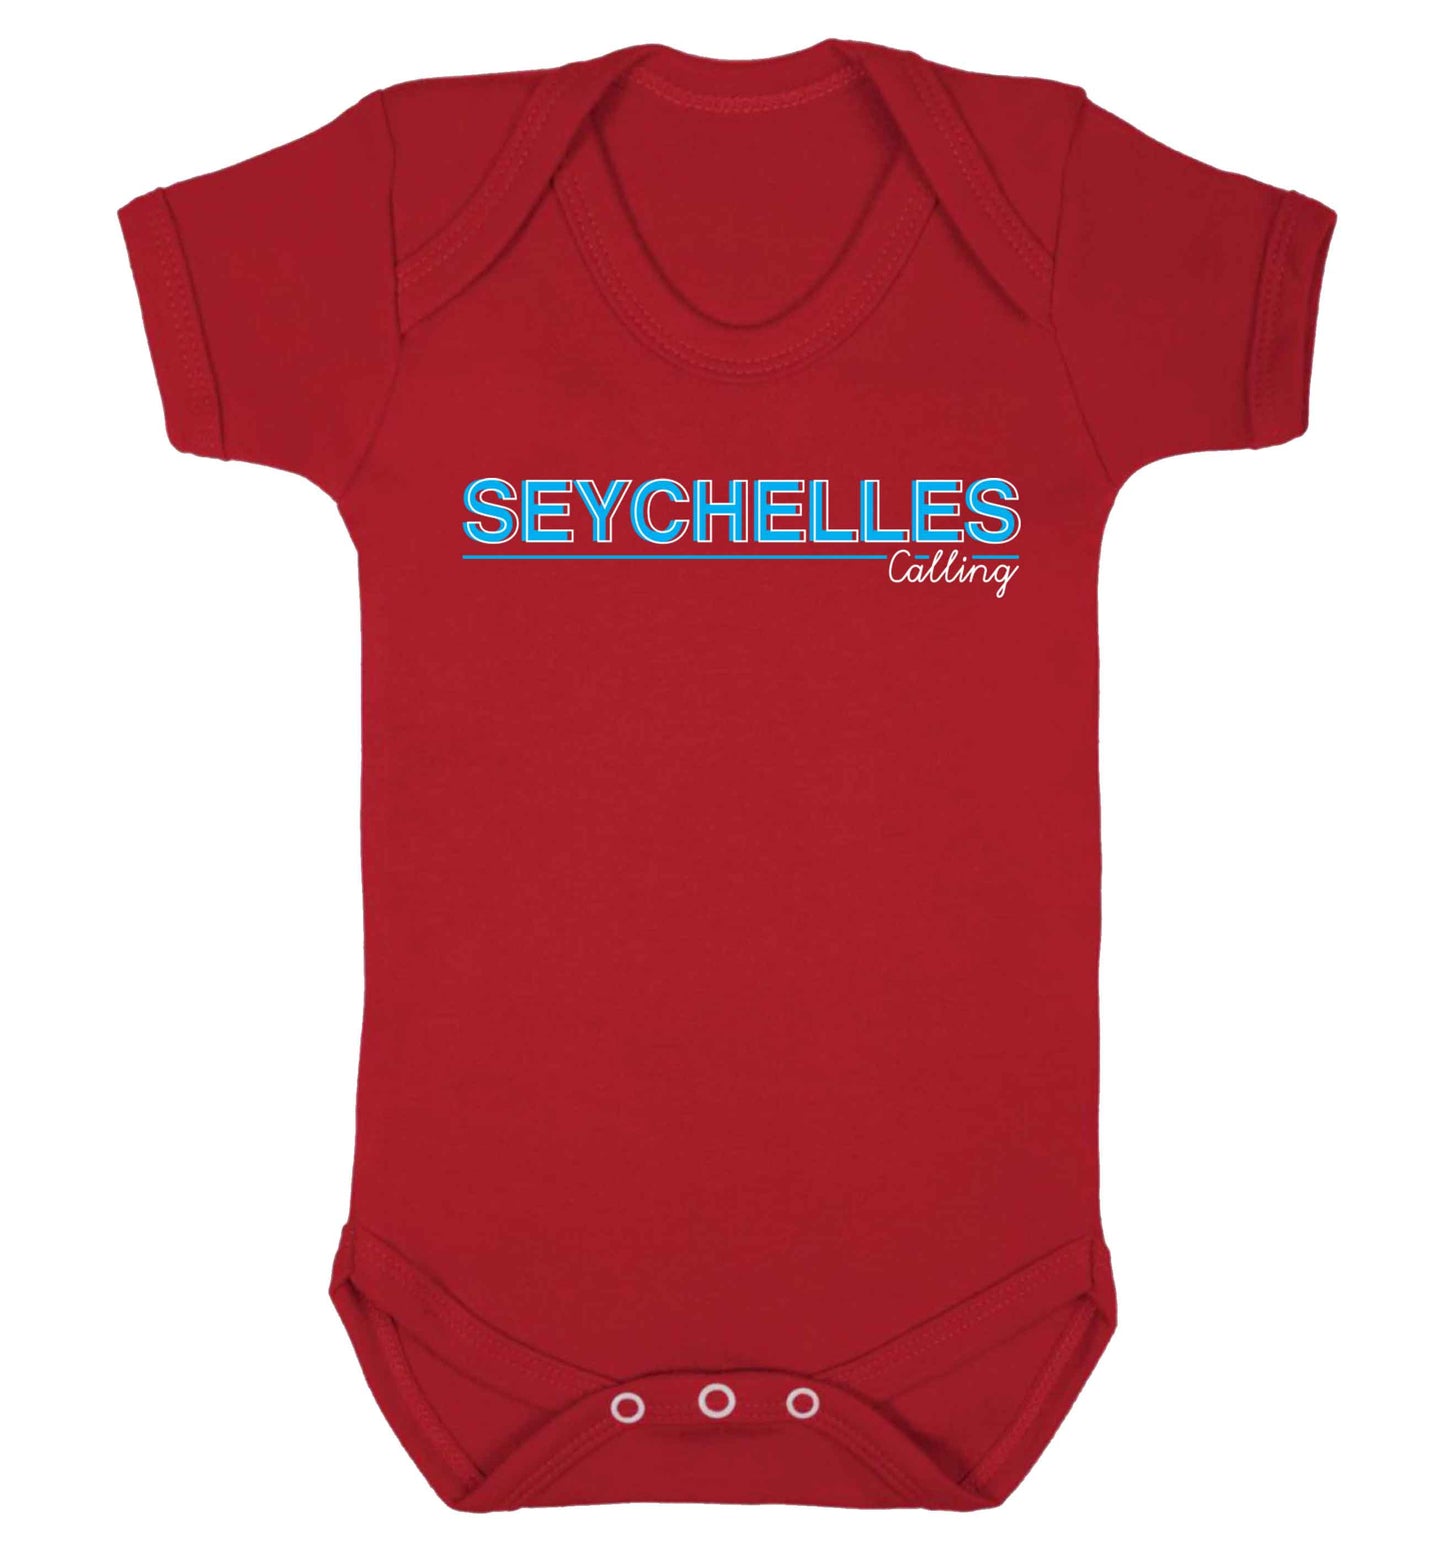 Seychelles calling Baby Vest red 18-24 months